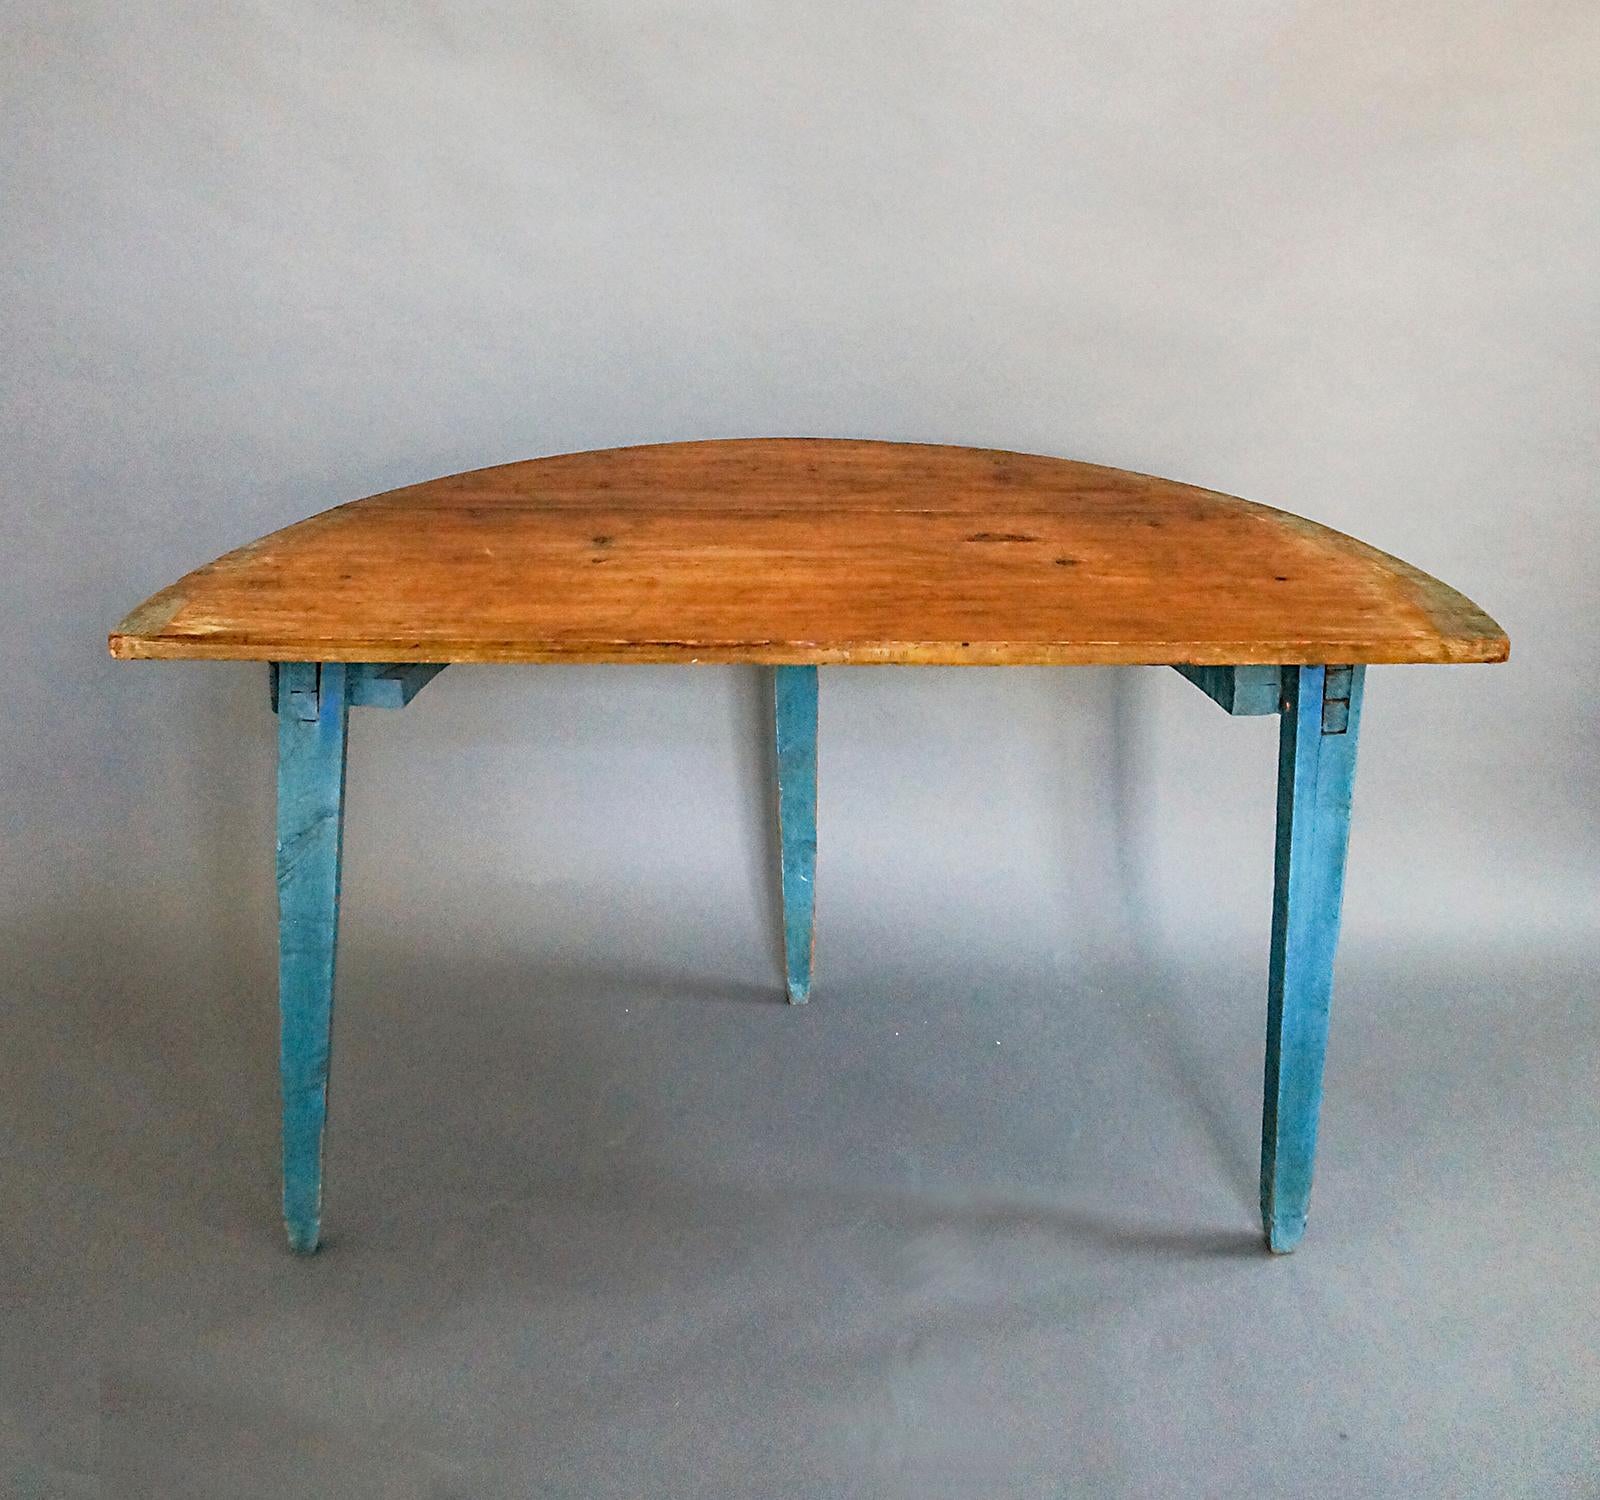 Hälsingland Demilune Table In Good Condition For Sale In Great Barrington, MA